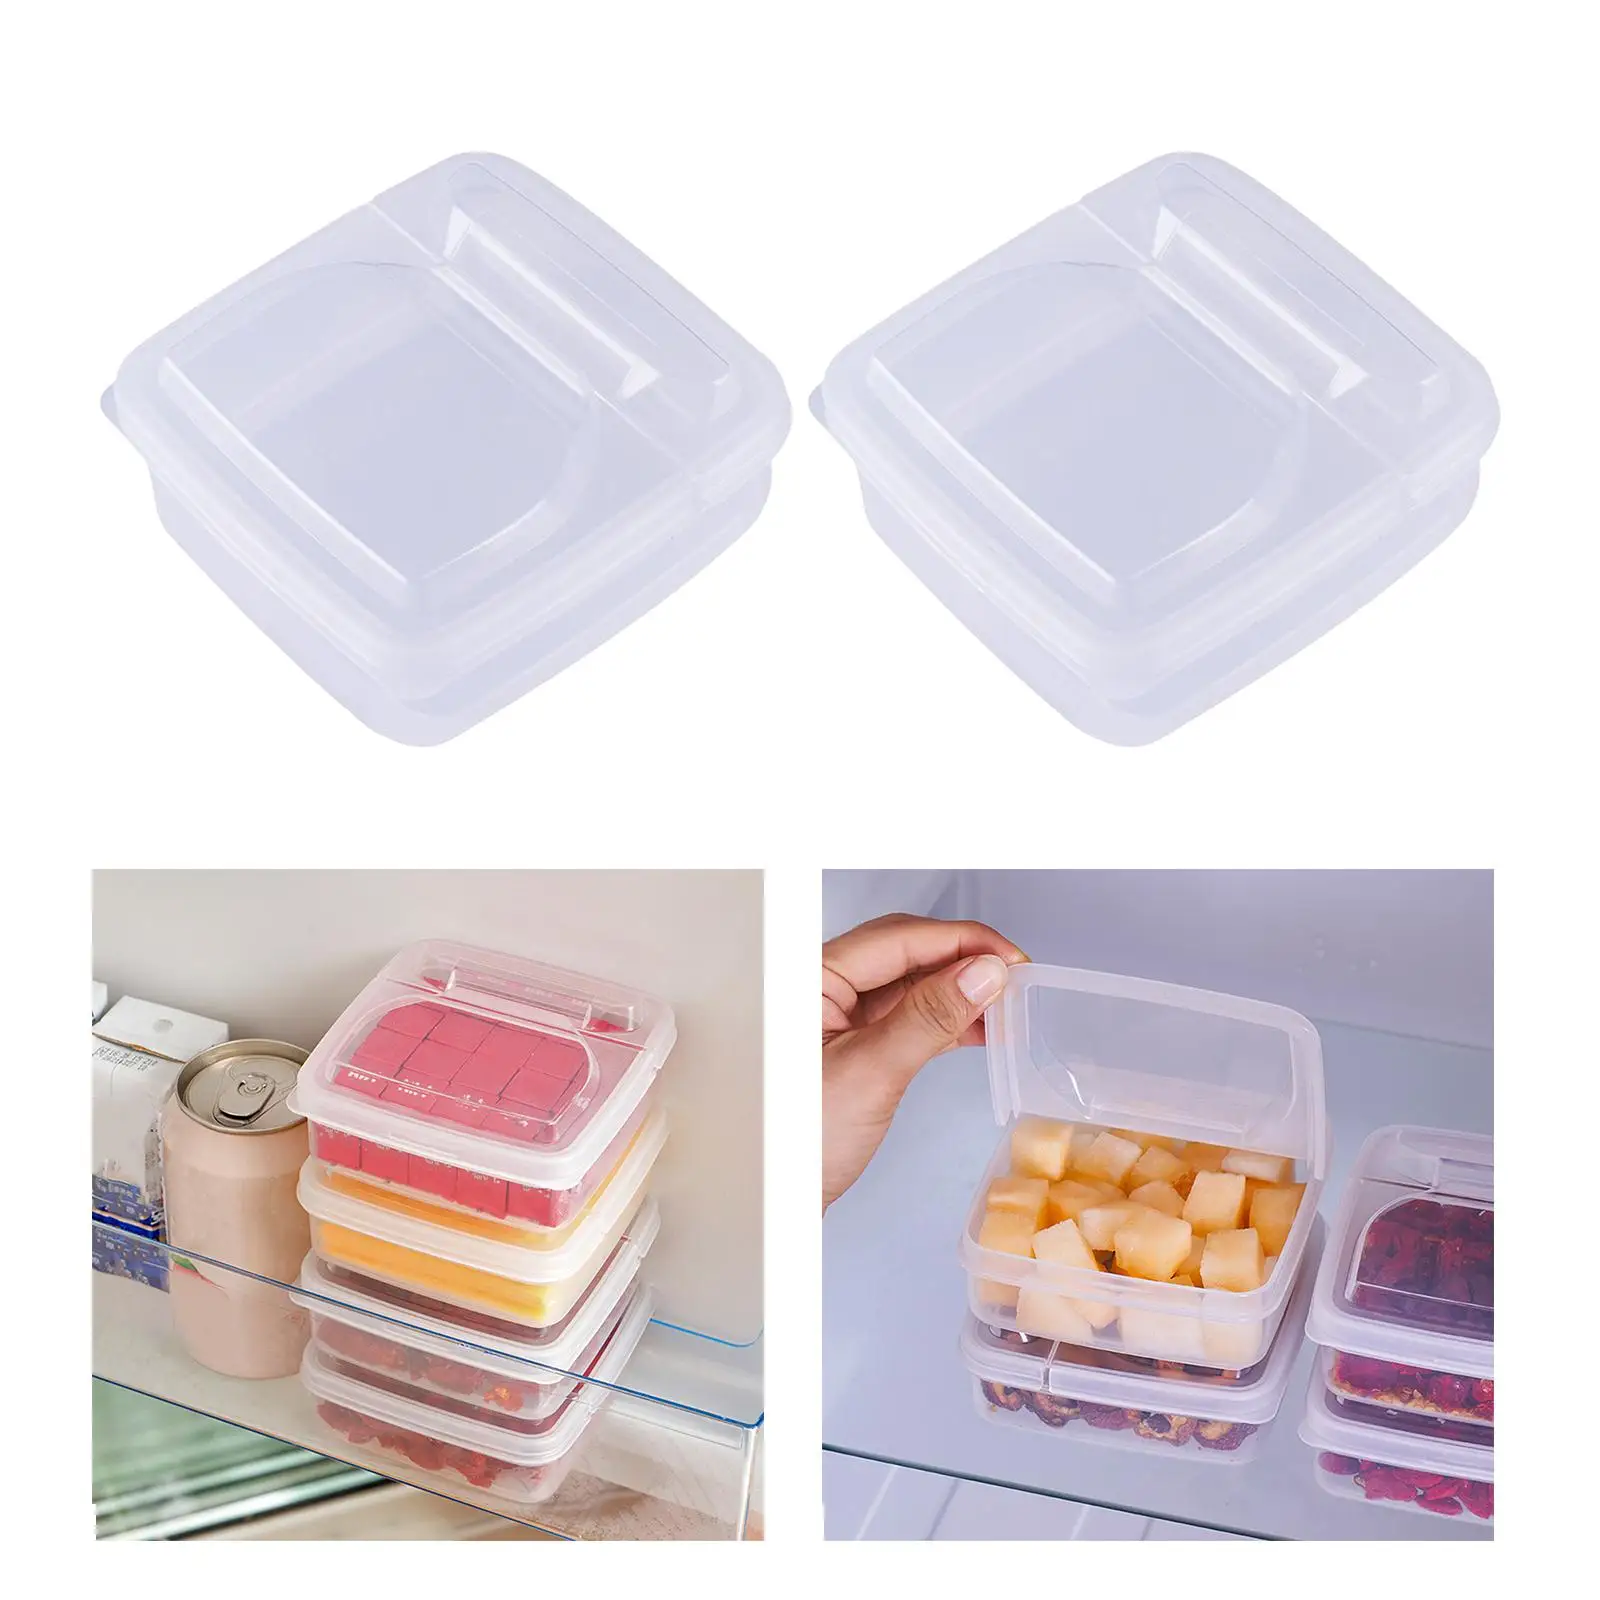 2 Pieces Compact Refrigerator Food Container Freezer Drawers Bins Food Grade